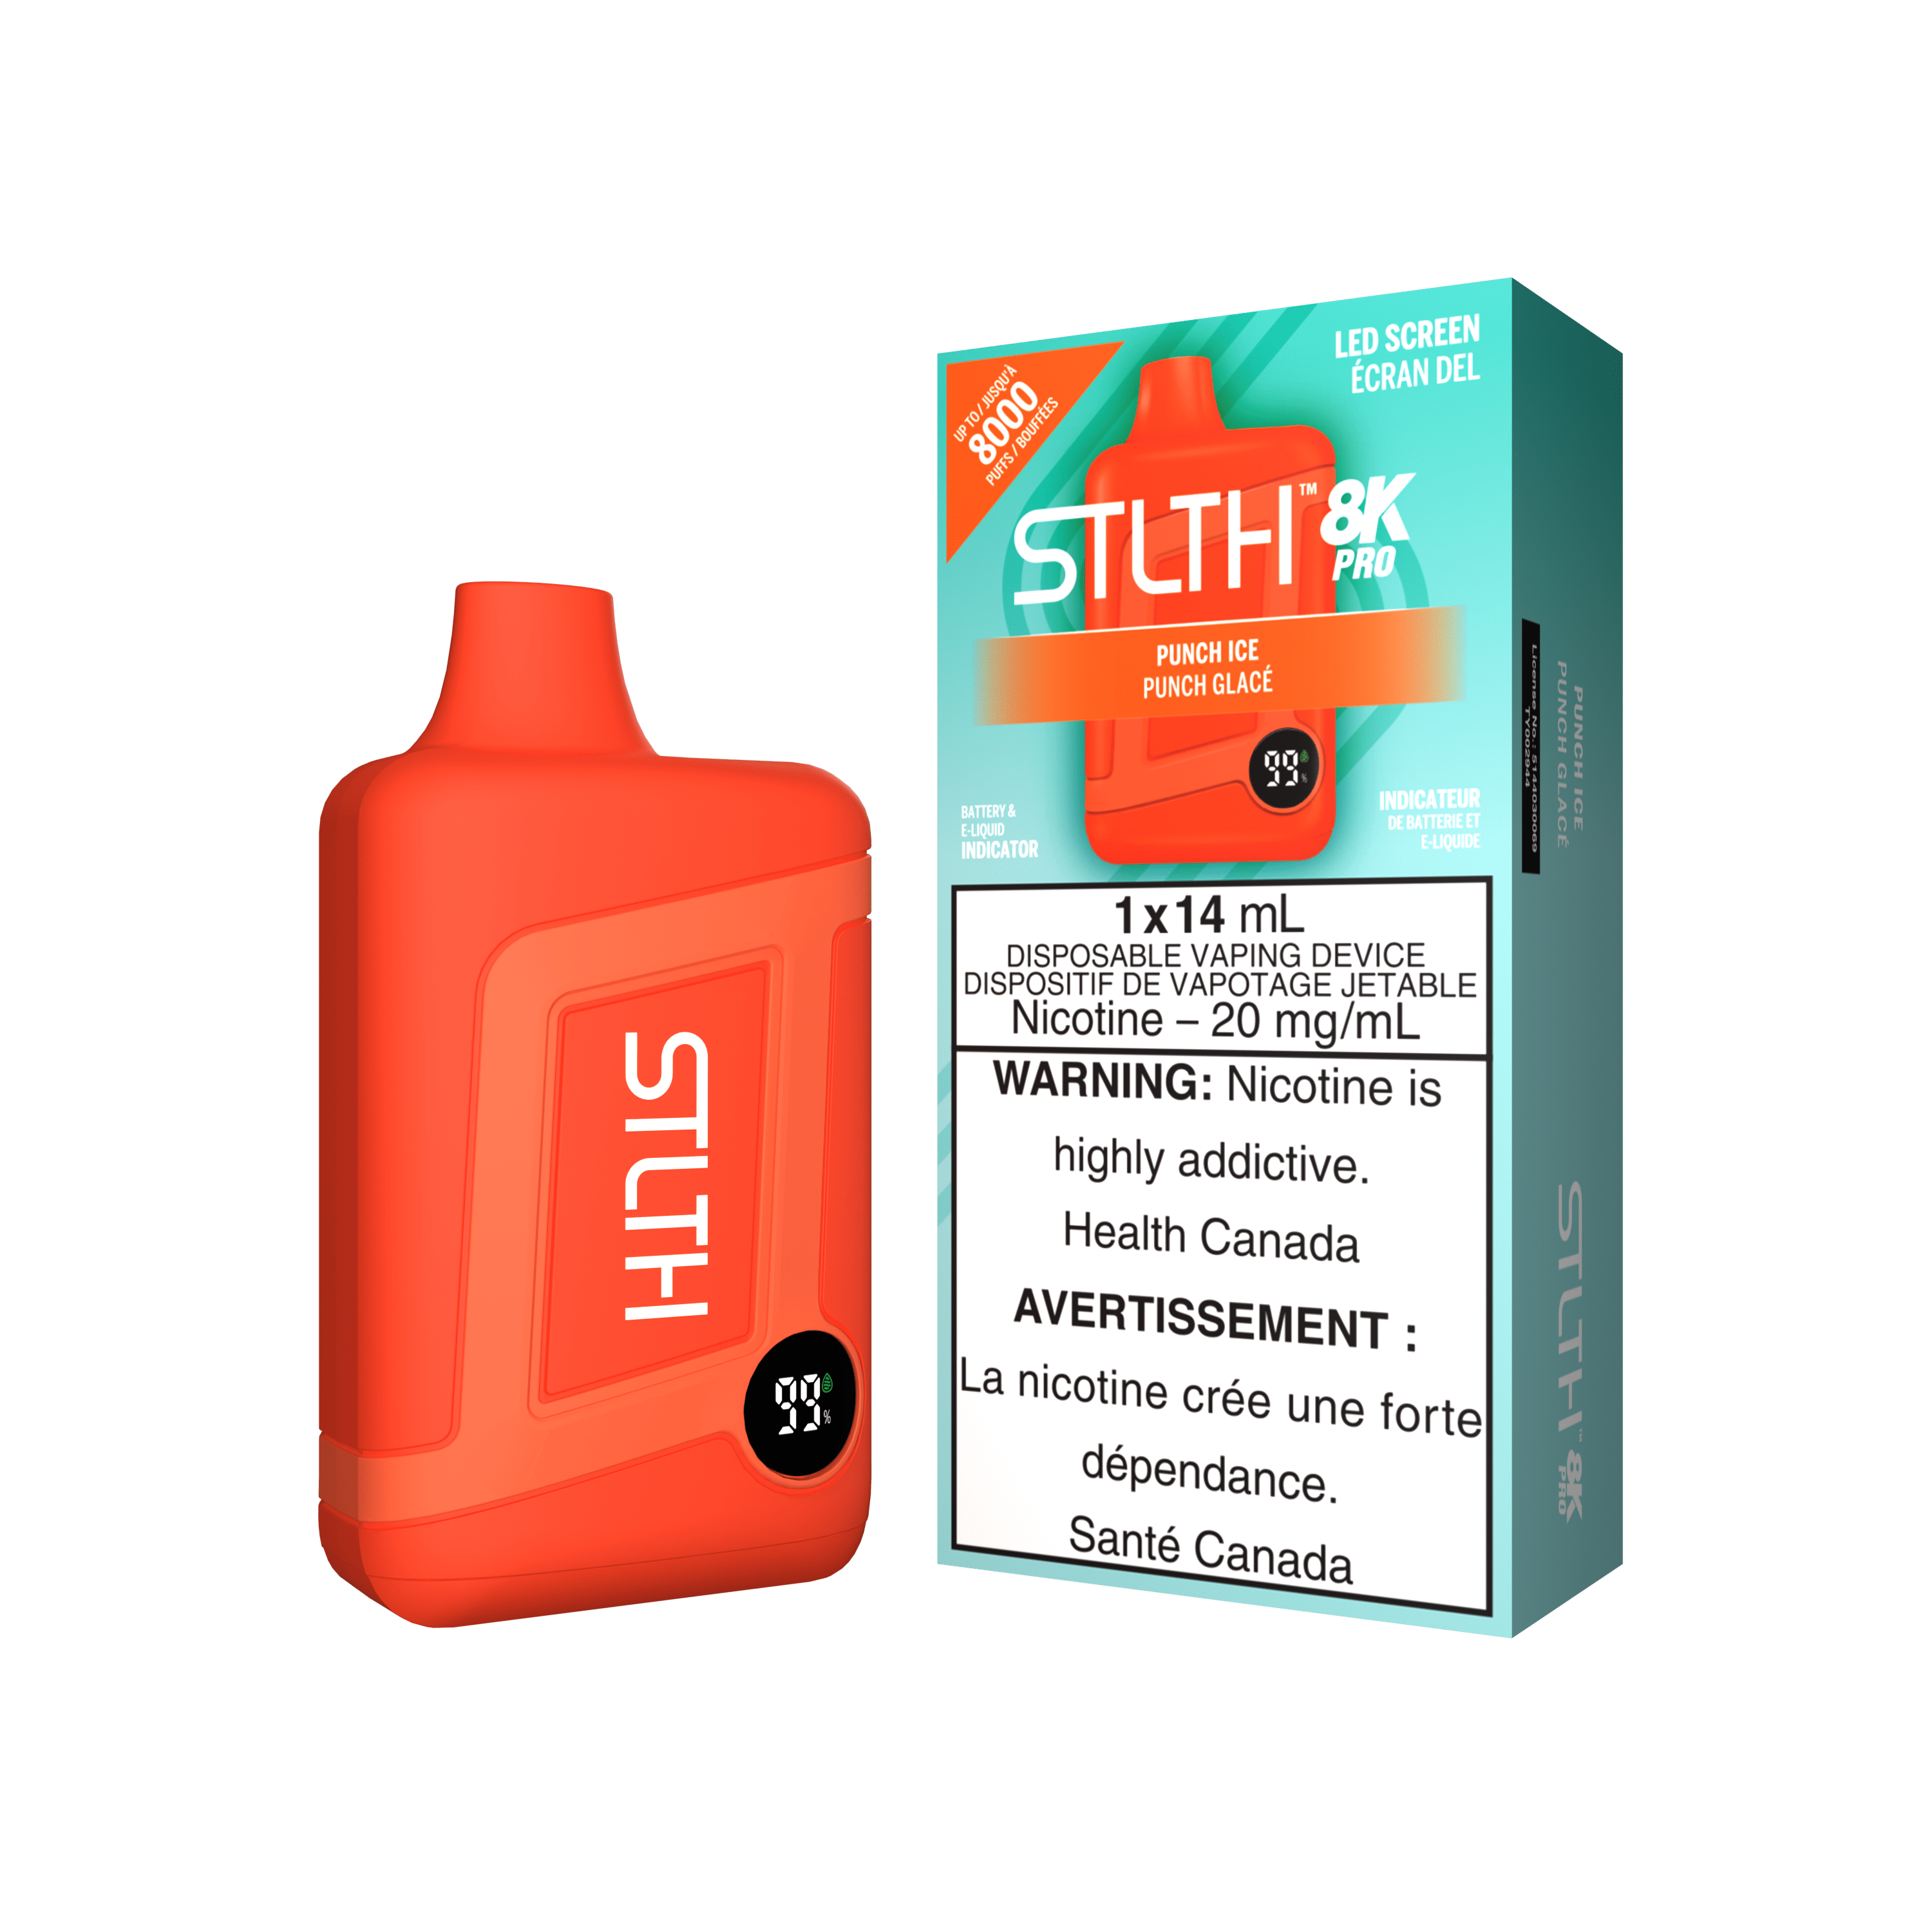 STLTH 8K Pro - Punch Ice Disposable Vape available on Canada online vape shop